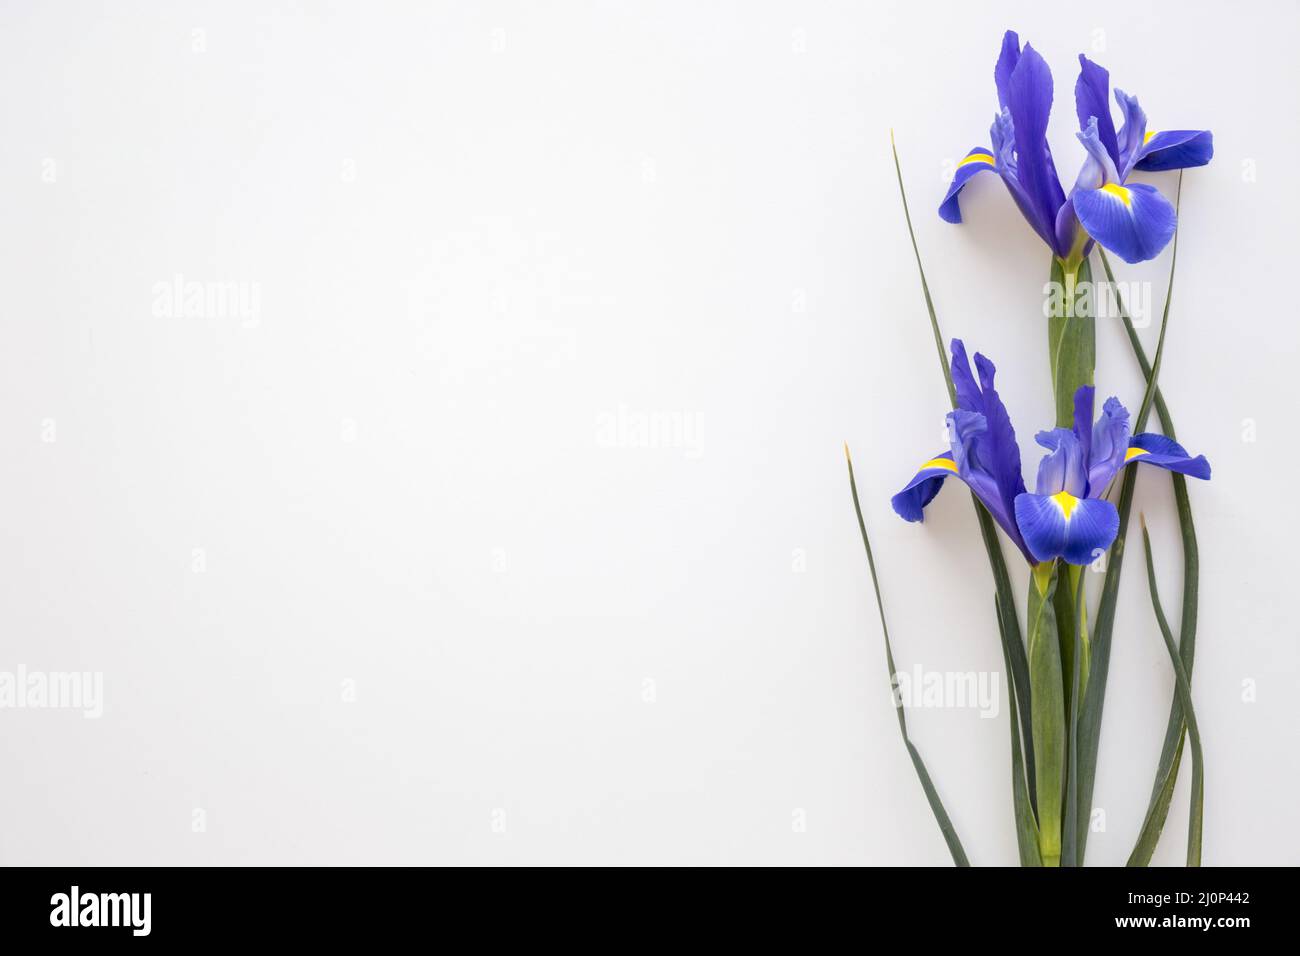 Purple iris flowers isolated white background . High quality and resolution beautiful photo concept Stock Photo